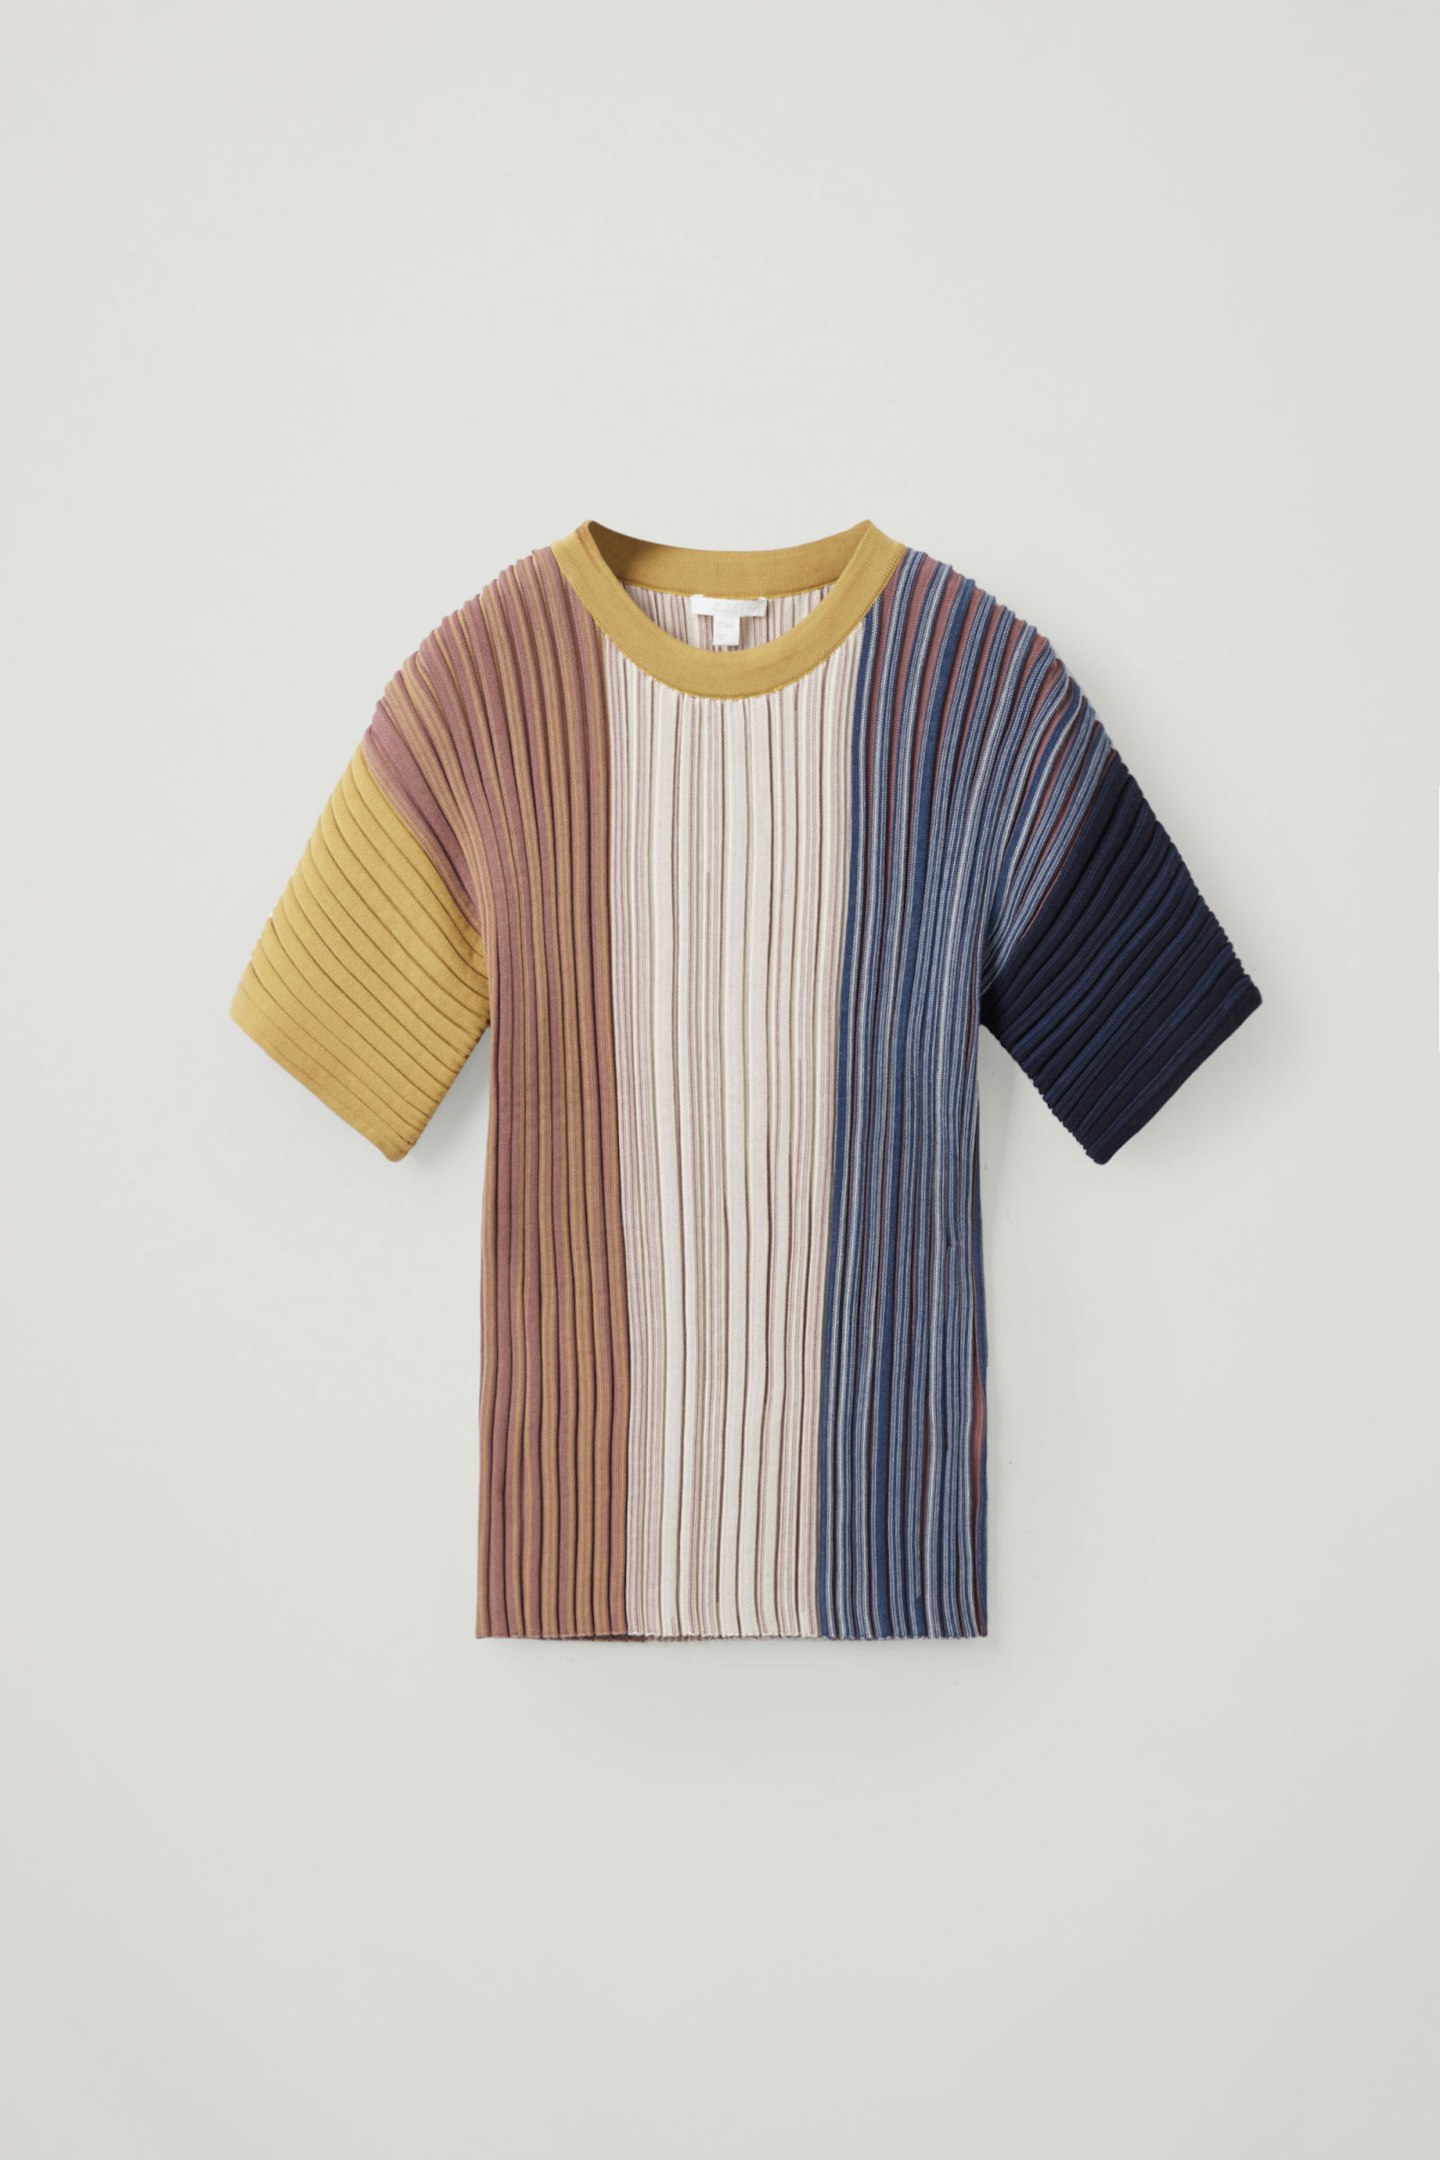 Pleated Top, £69, Cos